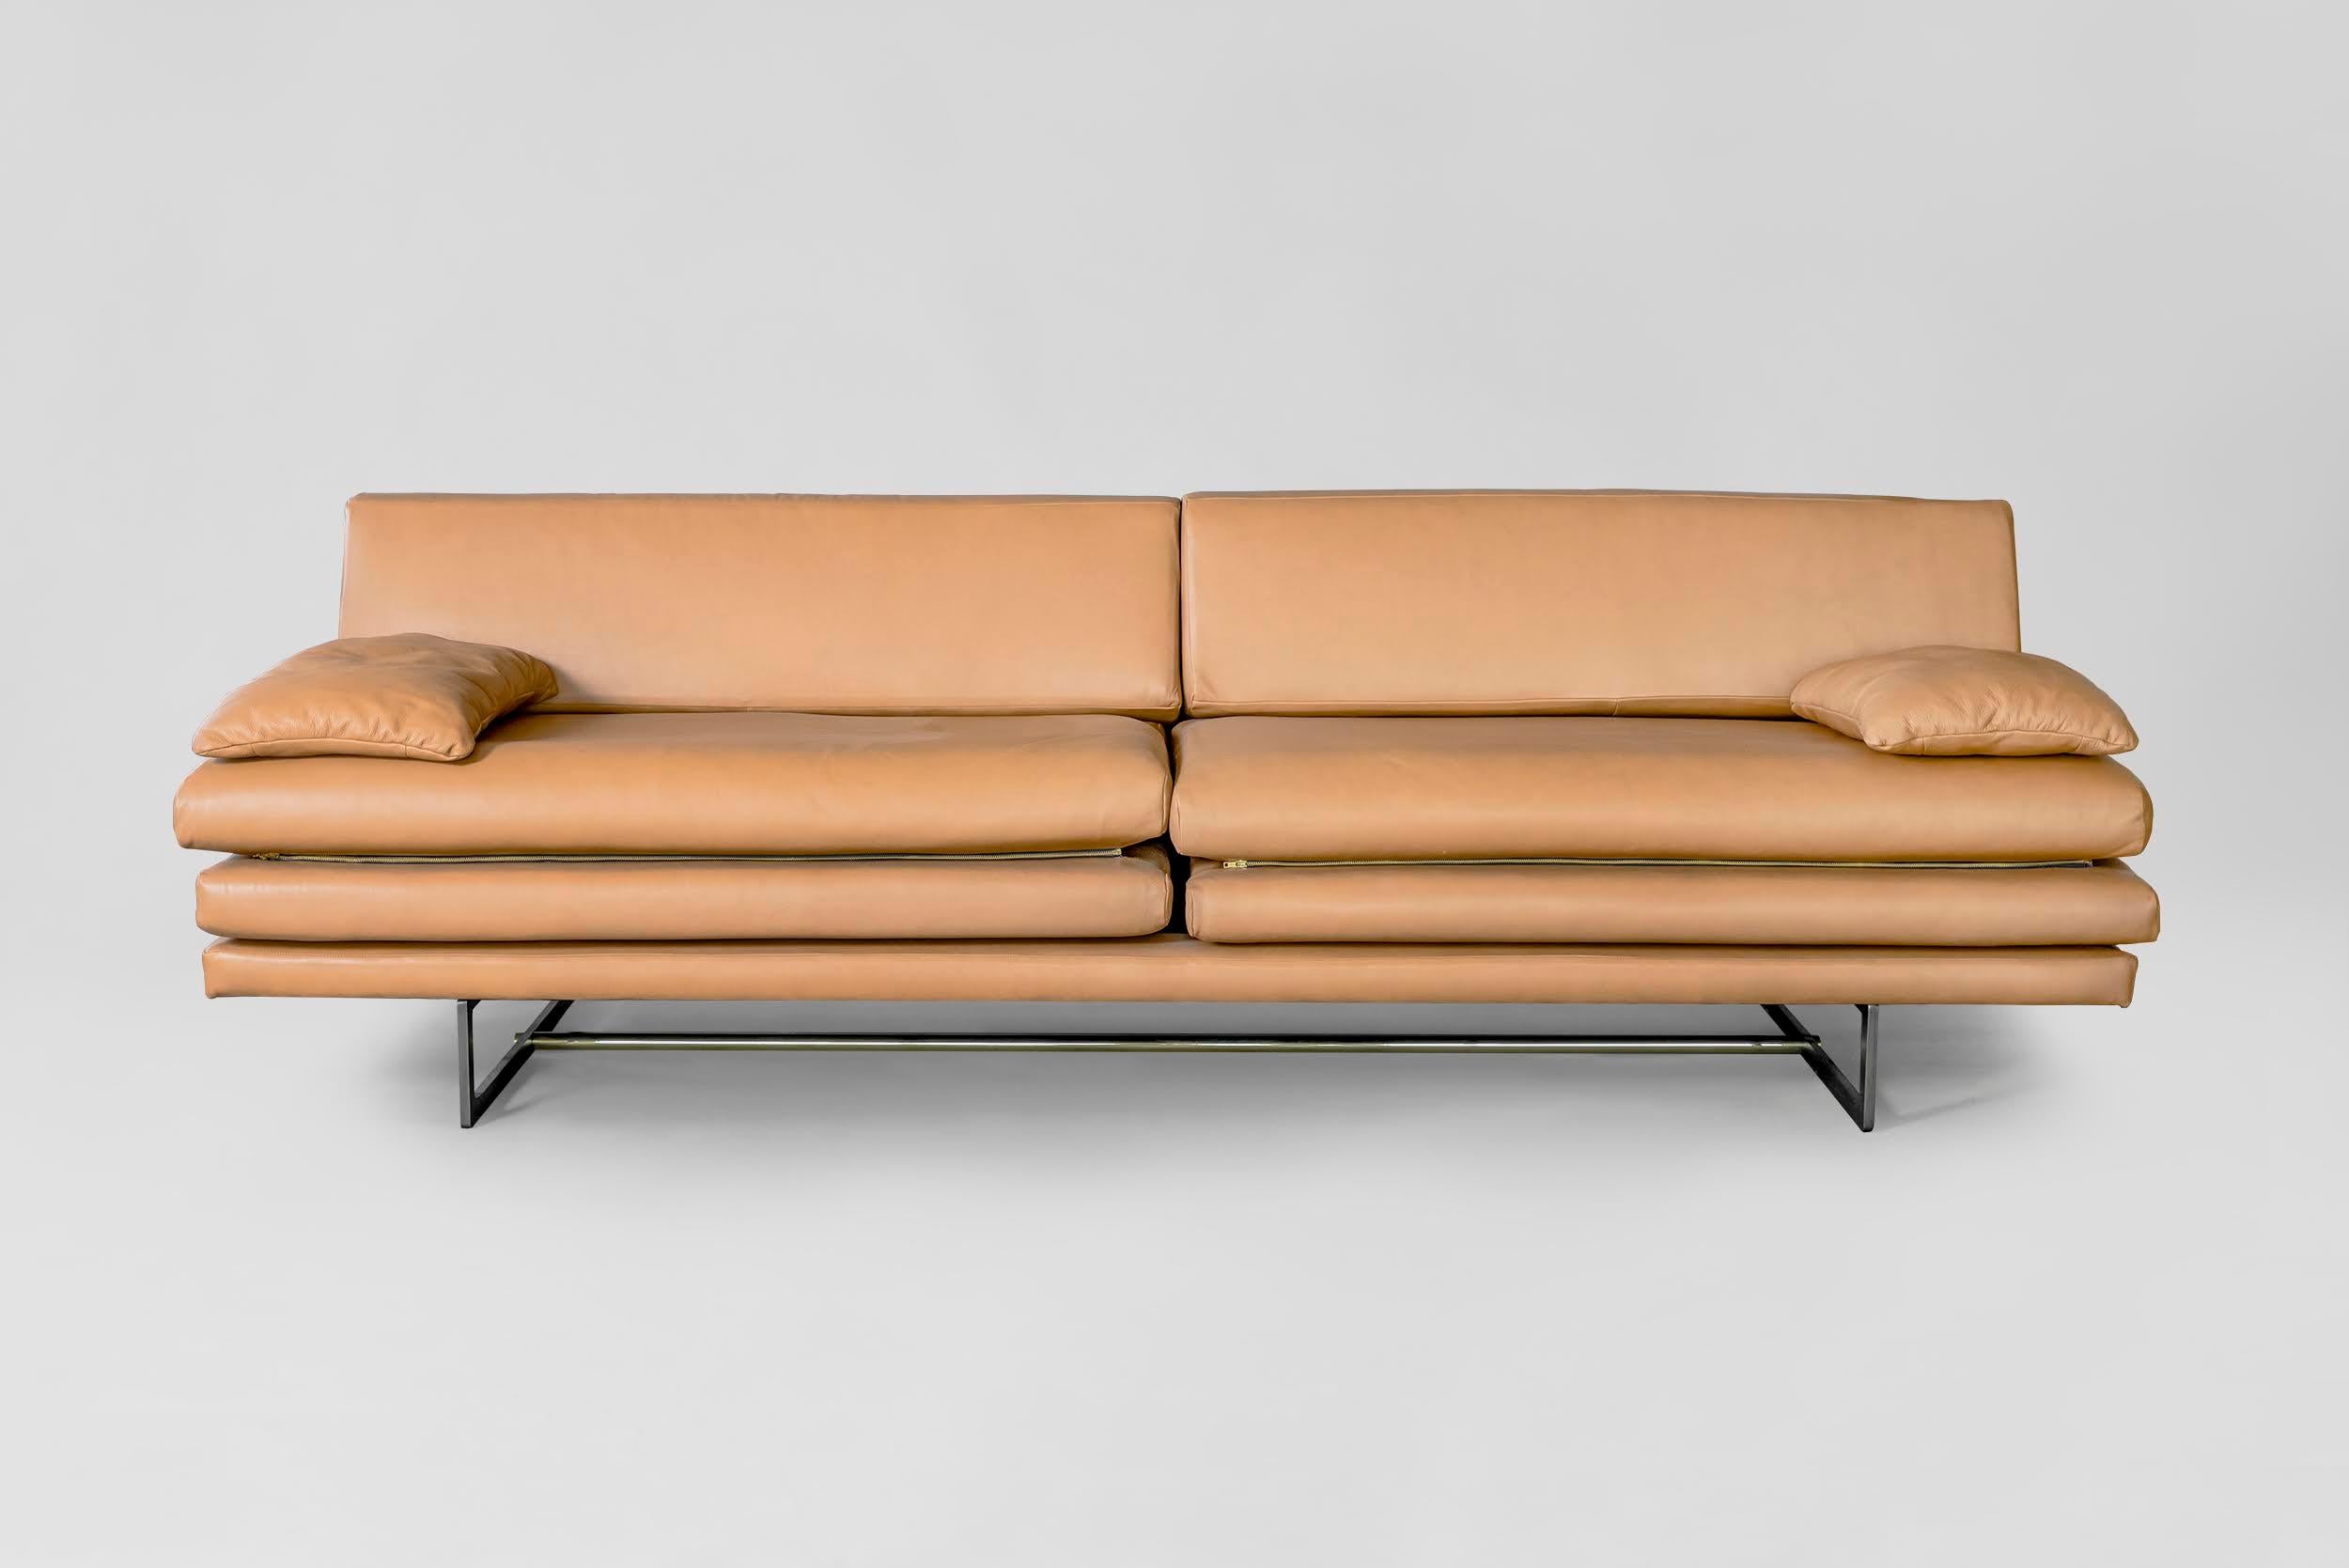 Milan sofa by Atra Design.
Dimensions: D 244.9 x W 93 x H 60.4 cm.
Materials: leather, steel.
Available in leather or fabric.

Atra Design
We are Atra, a furniture brand produced by Atra form a mexico city–based high end production facility